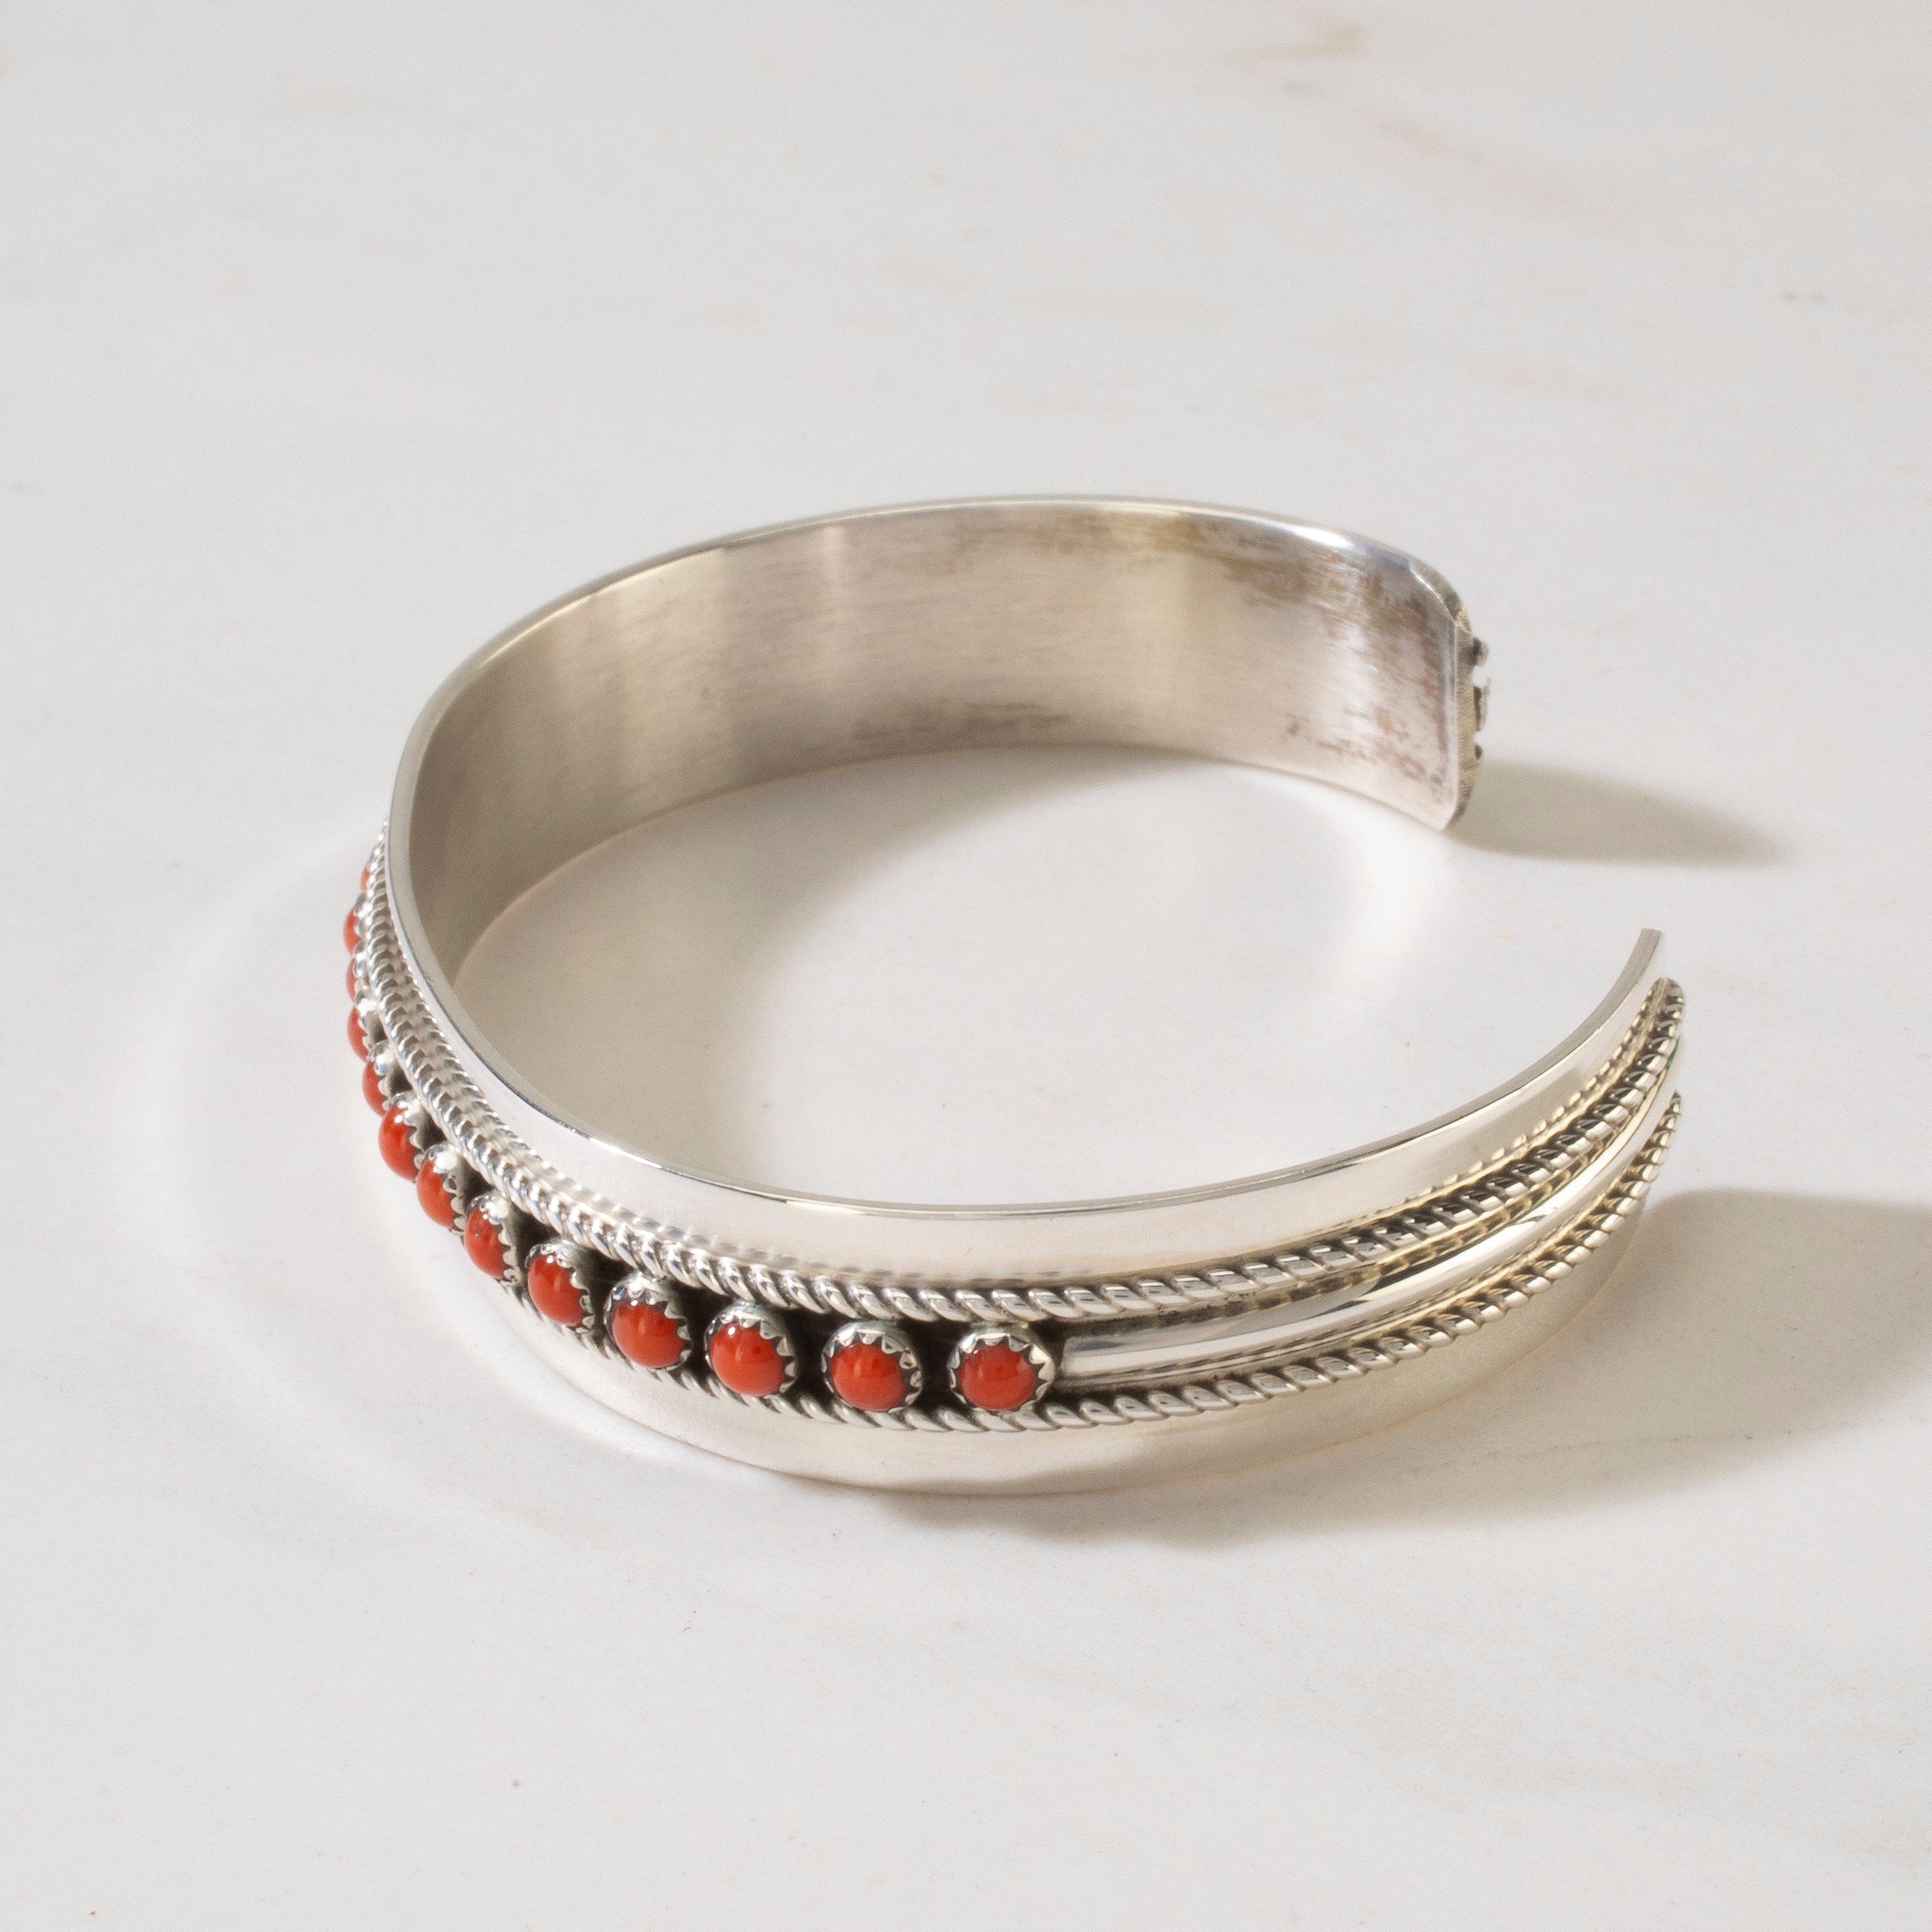 Kalifano Native American Jewelry Patrick Yazzie Navajo Red Coral USA Native American Made 925 Sterling Silver Cuff NAB1000.008